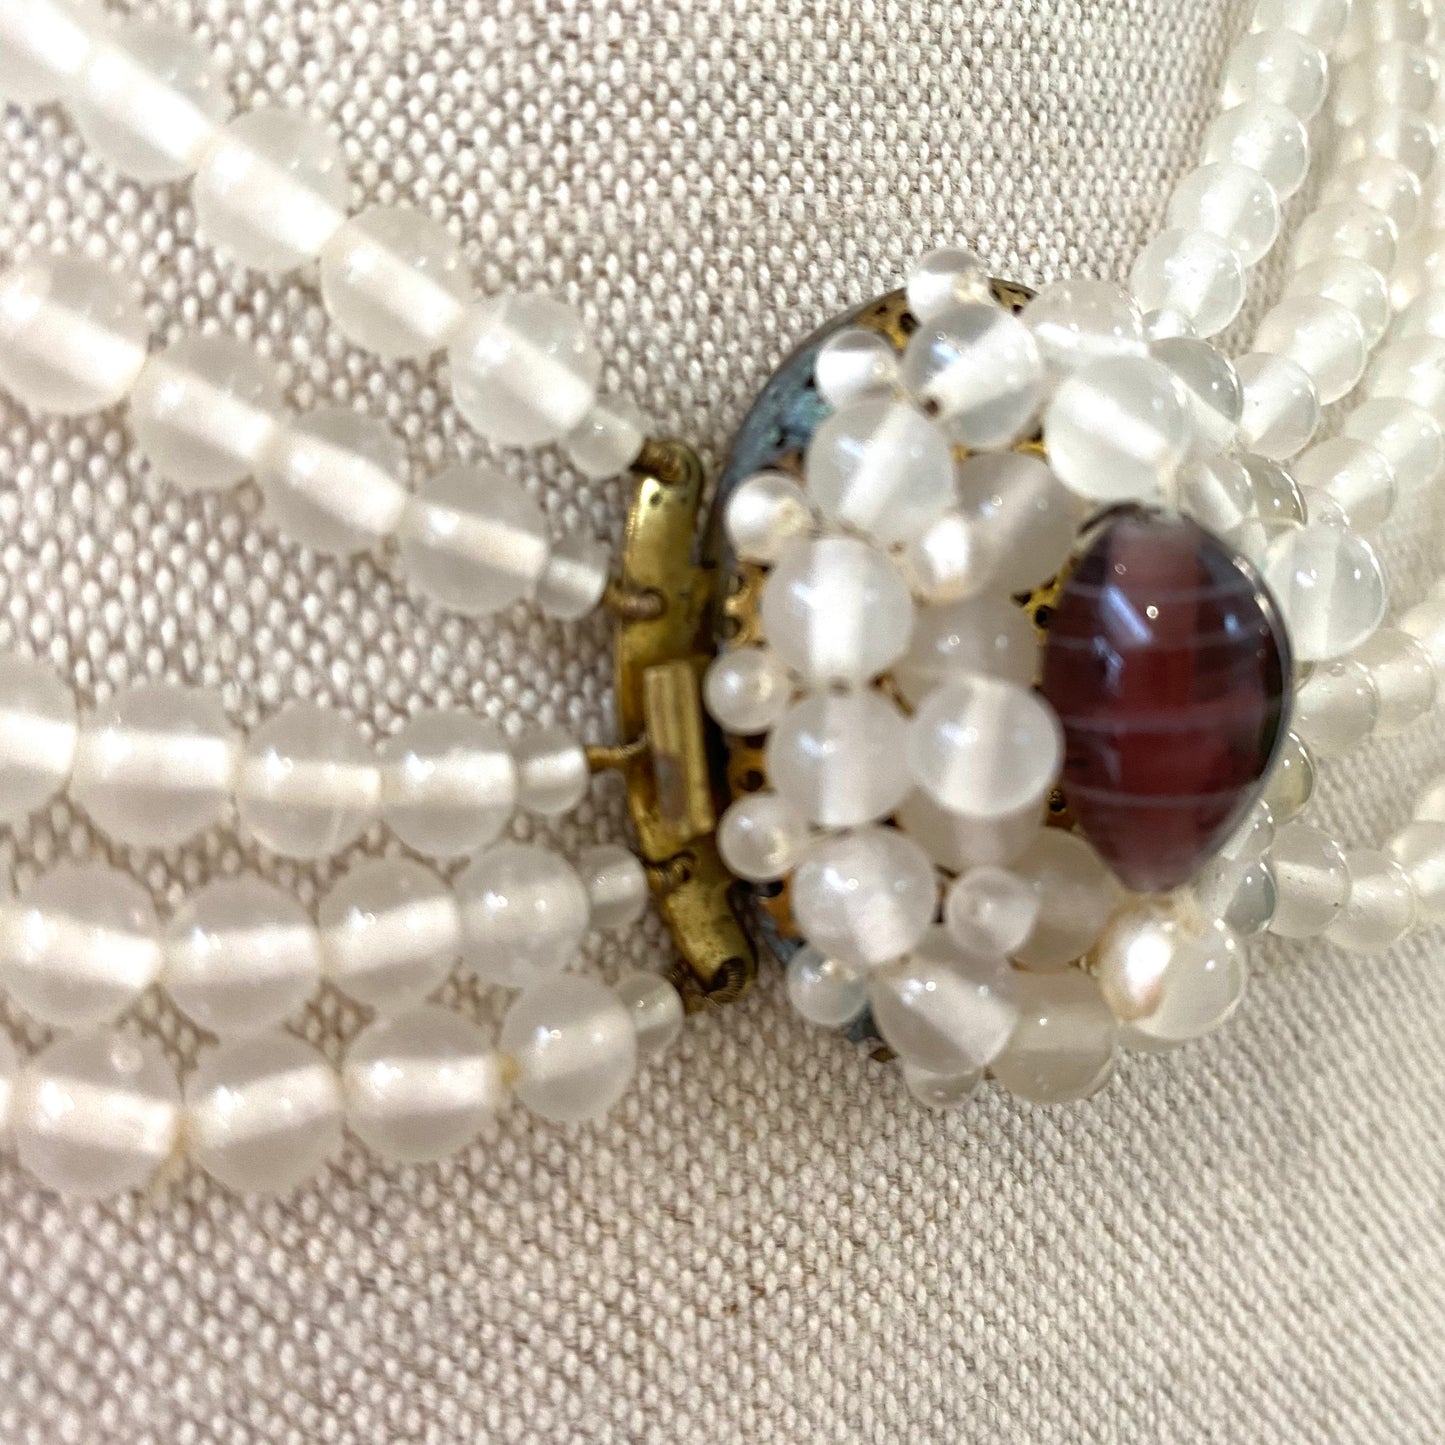 Unusual Five Strand Clear Glass Bead Necklace with Two Random Imitation Pearls and Art Glass Wired Filigree Double Clasp